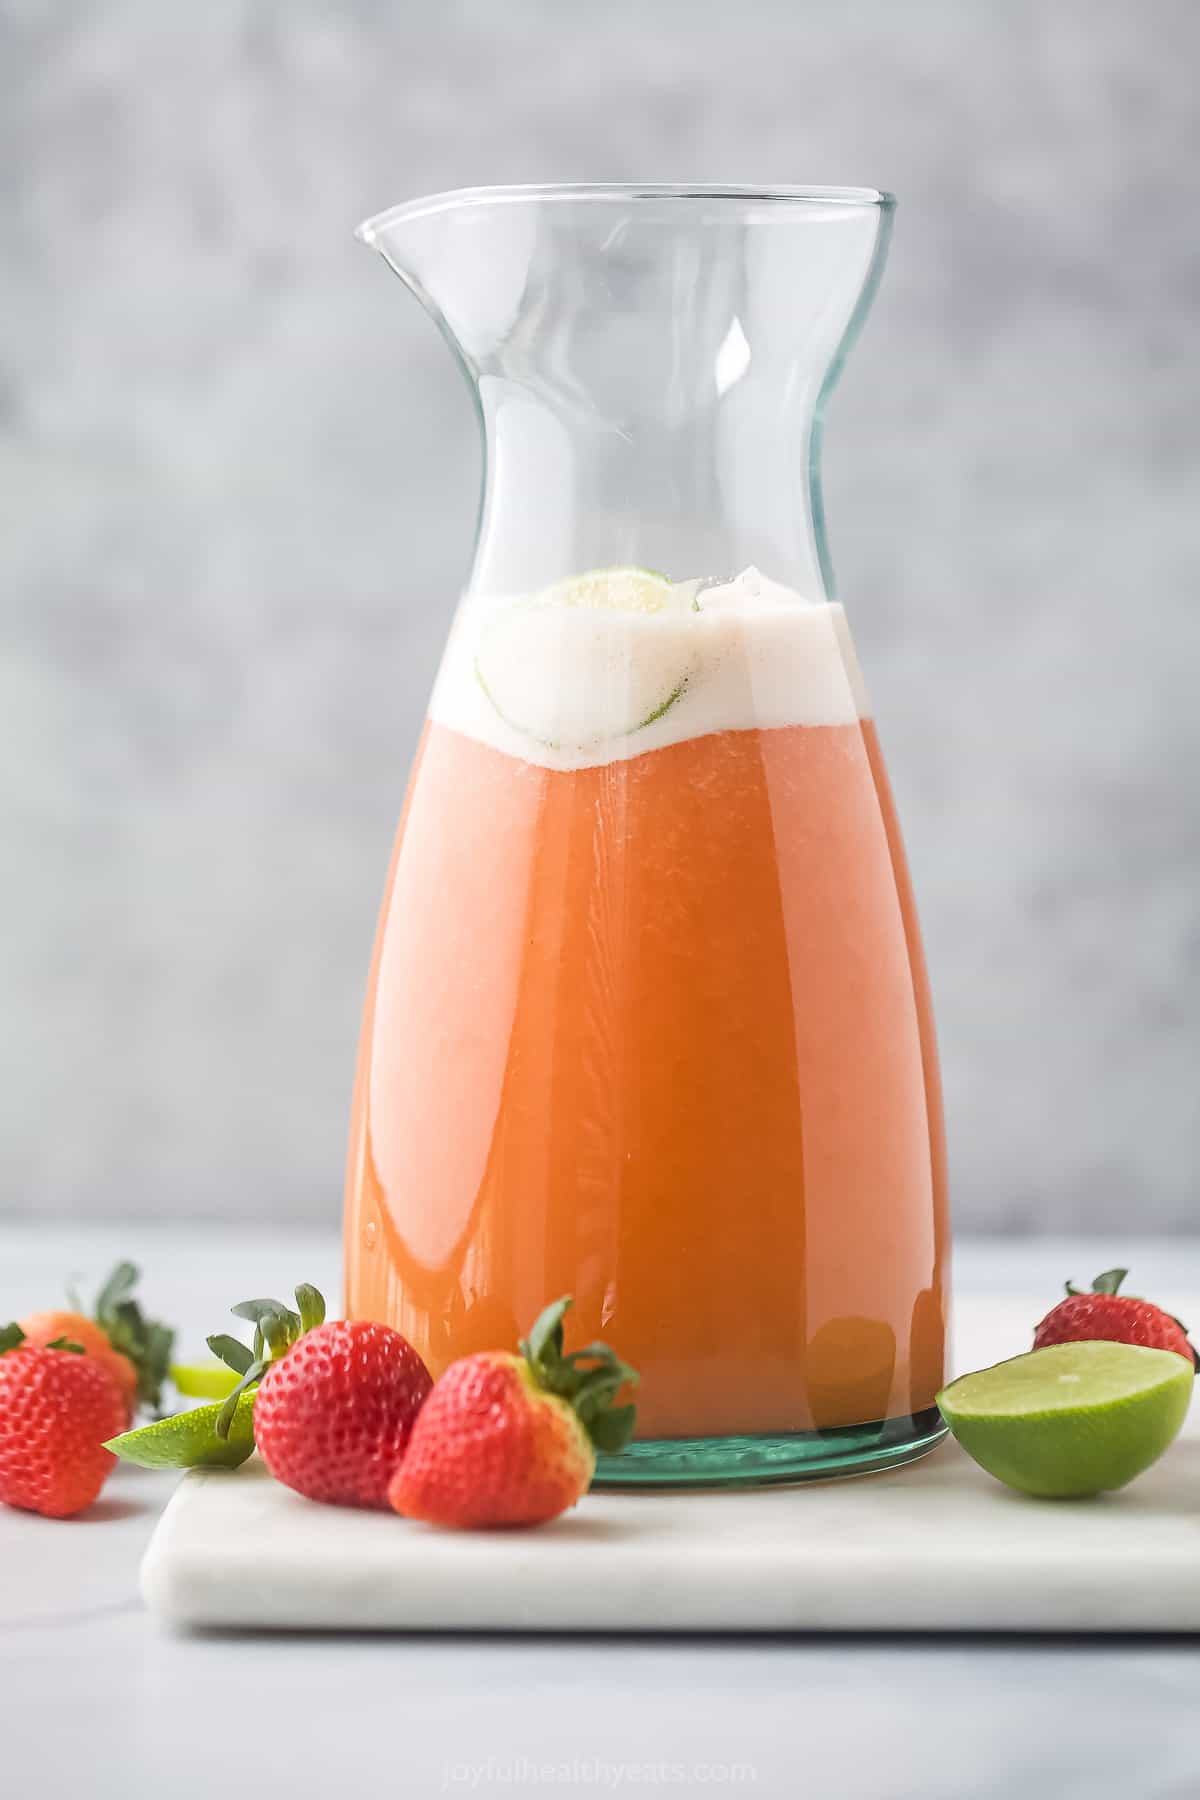 A pitcher of strawberry pineapple agua fresca